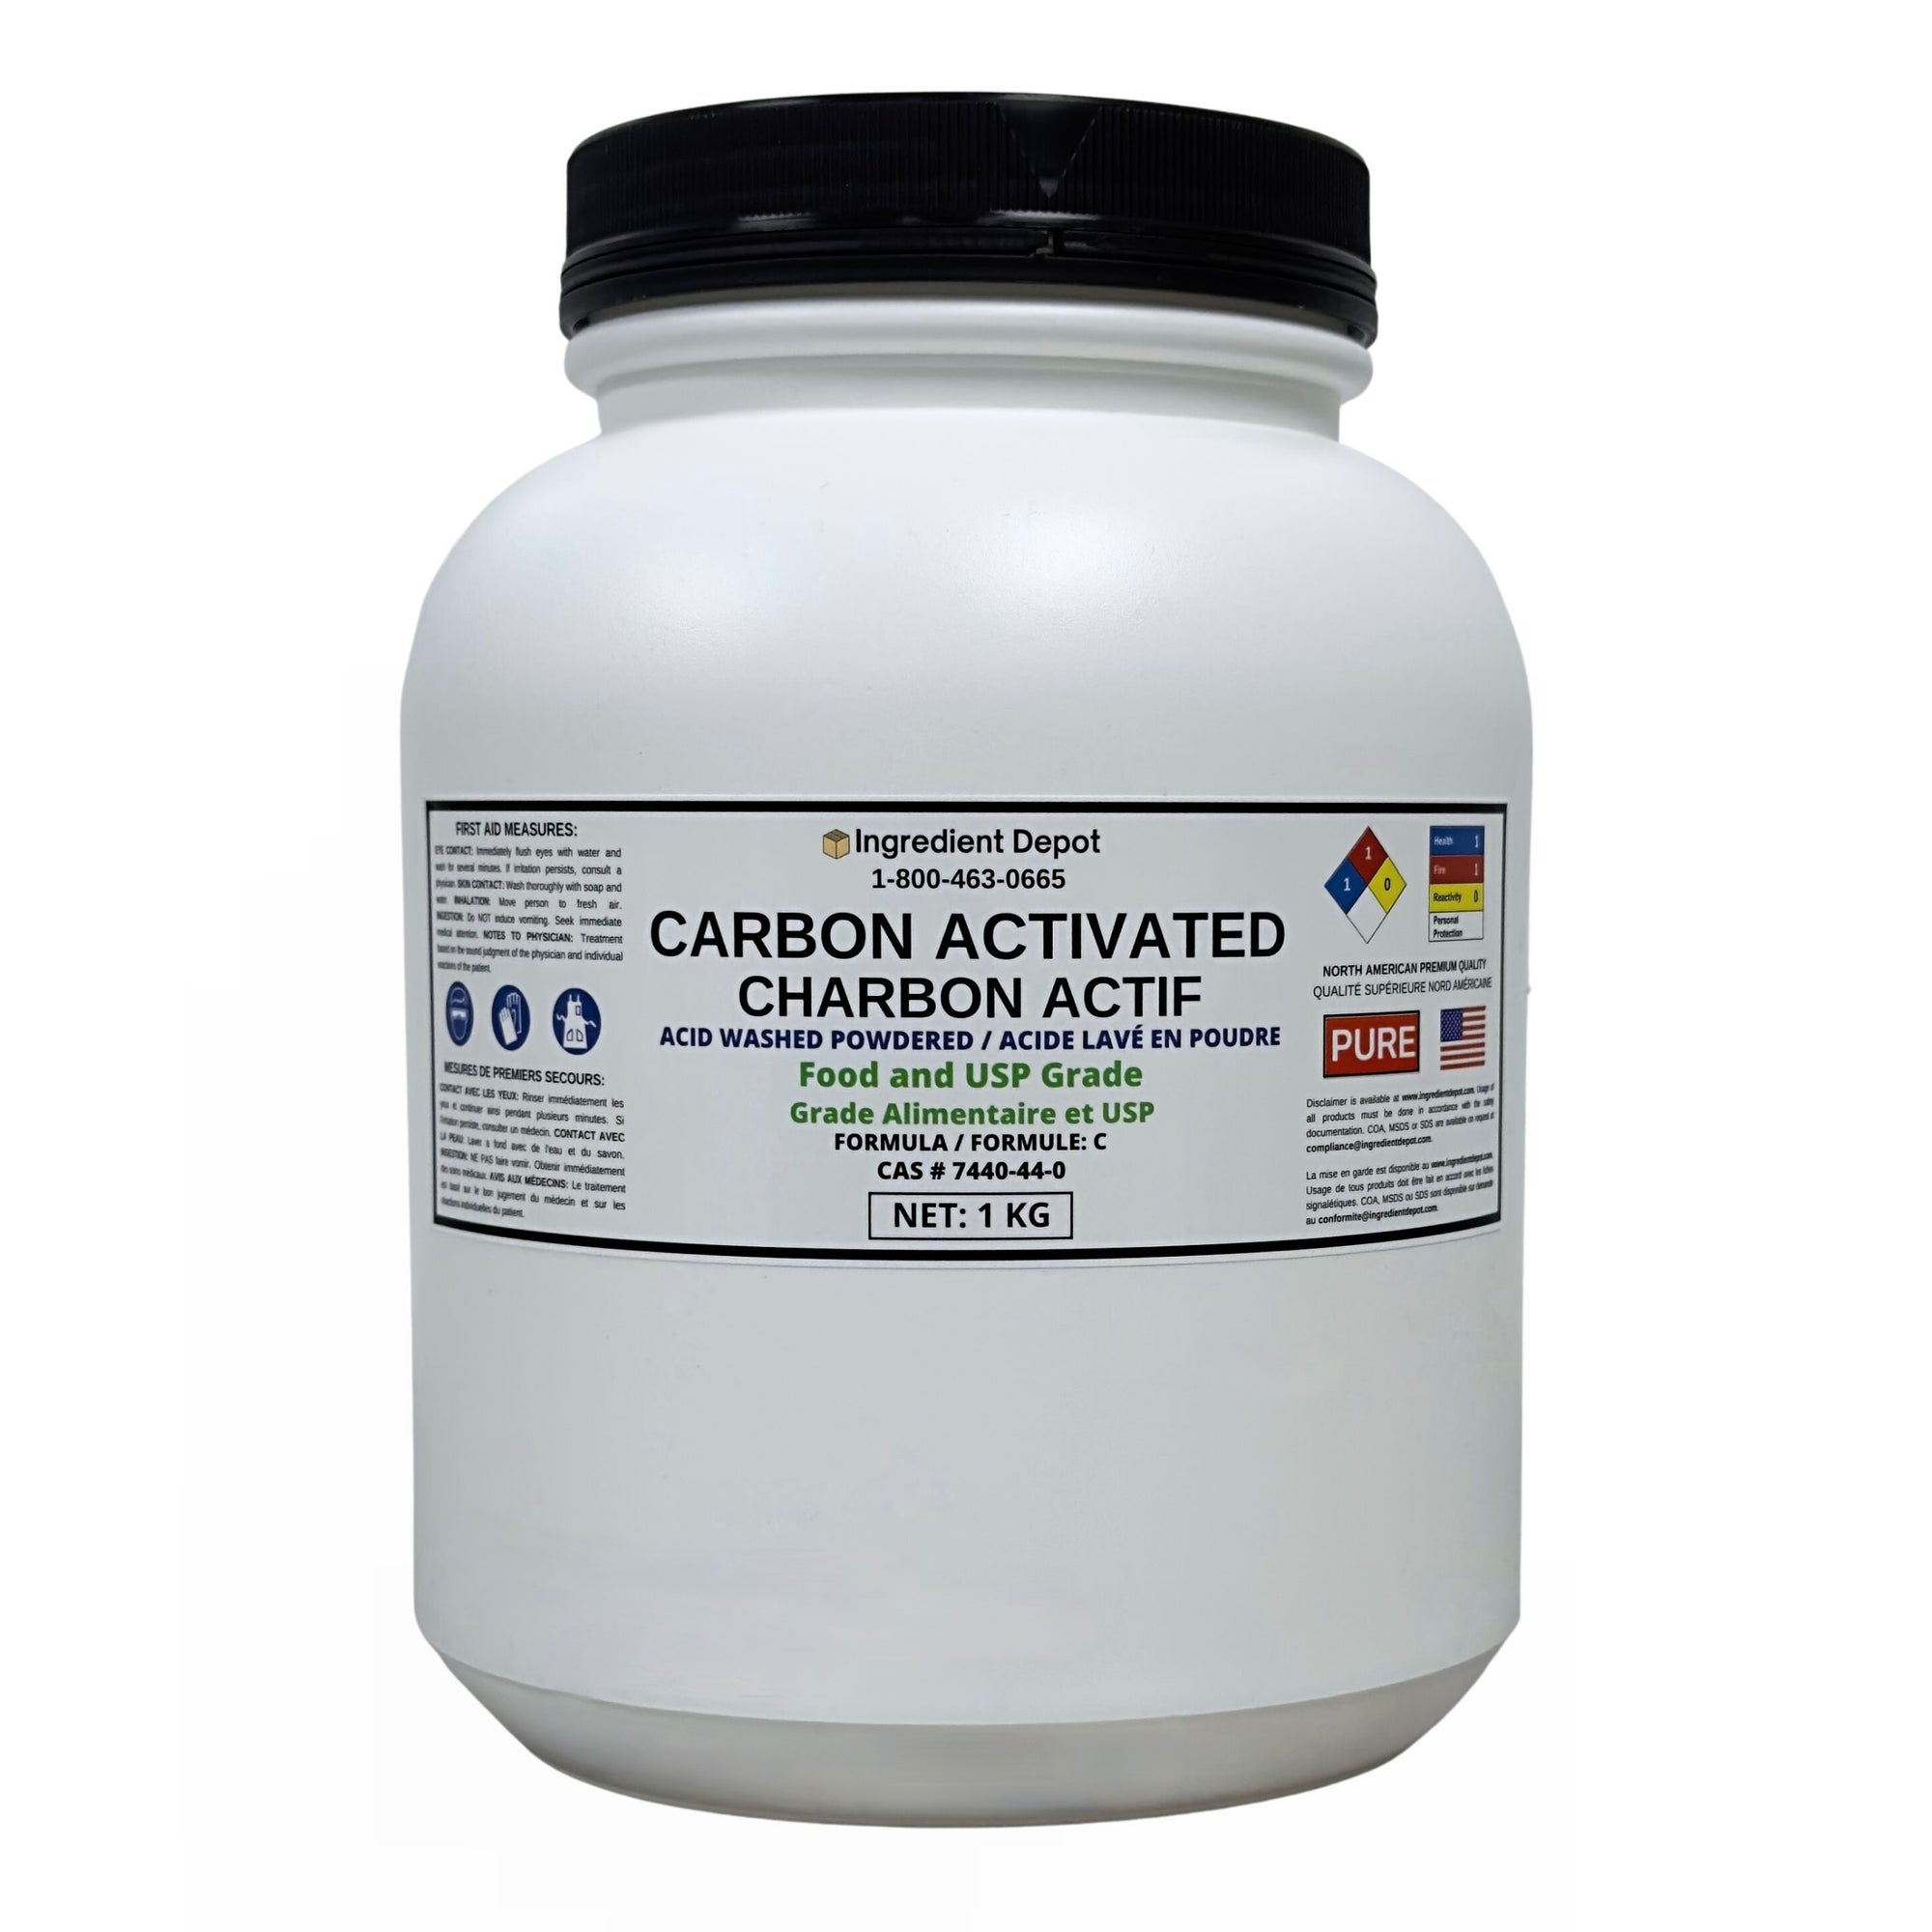 Carbon Activated Acid Washed Powdered 1 kg